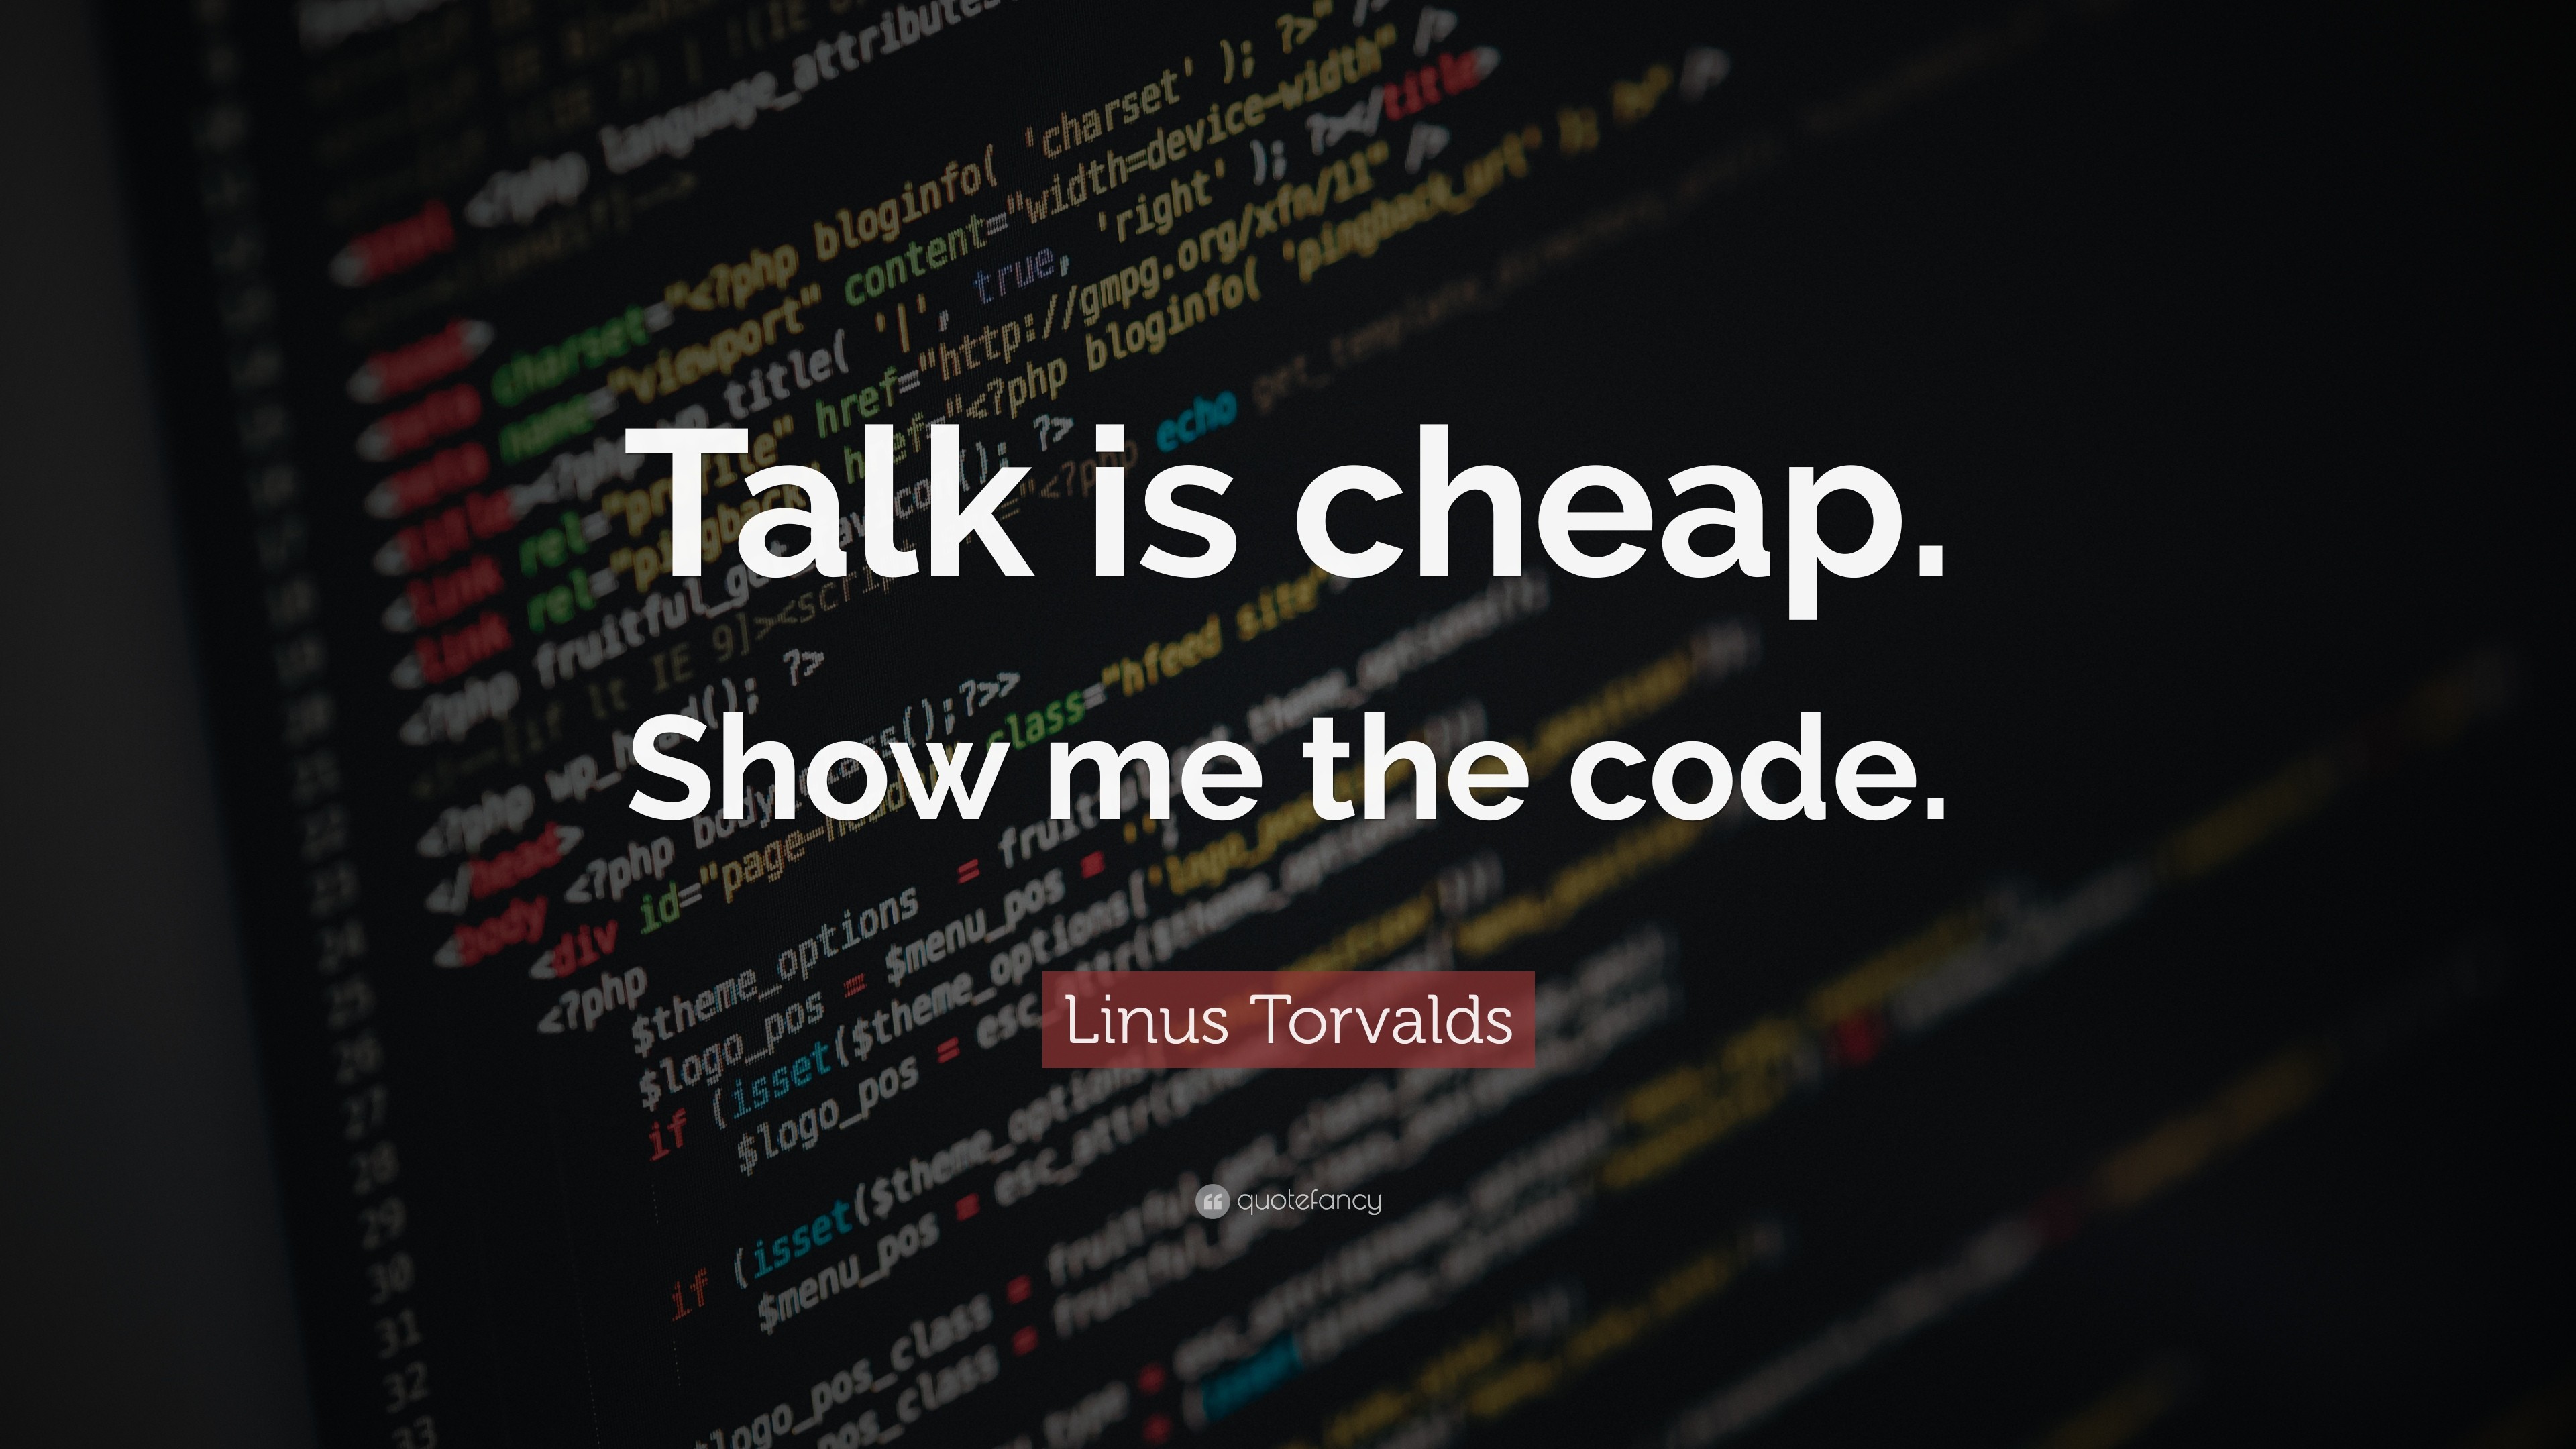 3840x2160 Programming Quotes: “Talk is cheap. Show me the code.” — Linus